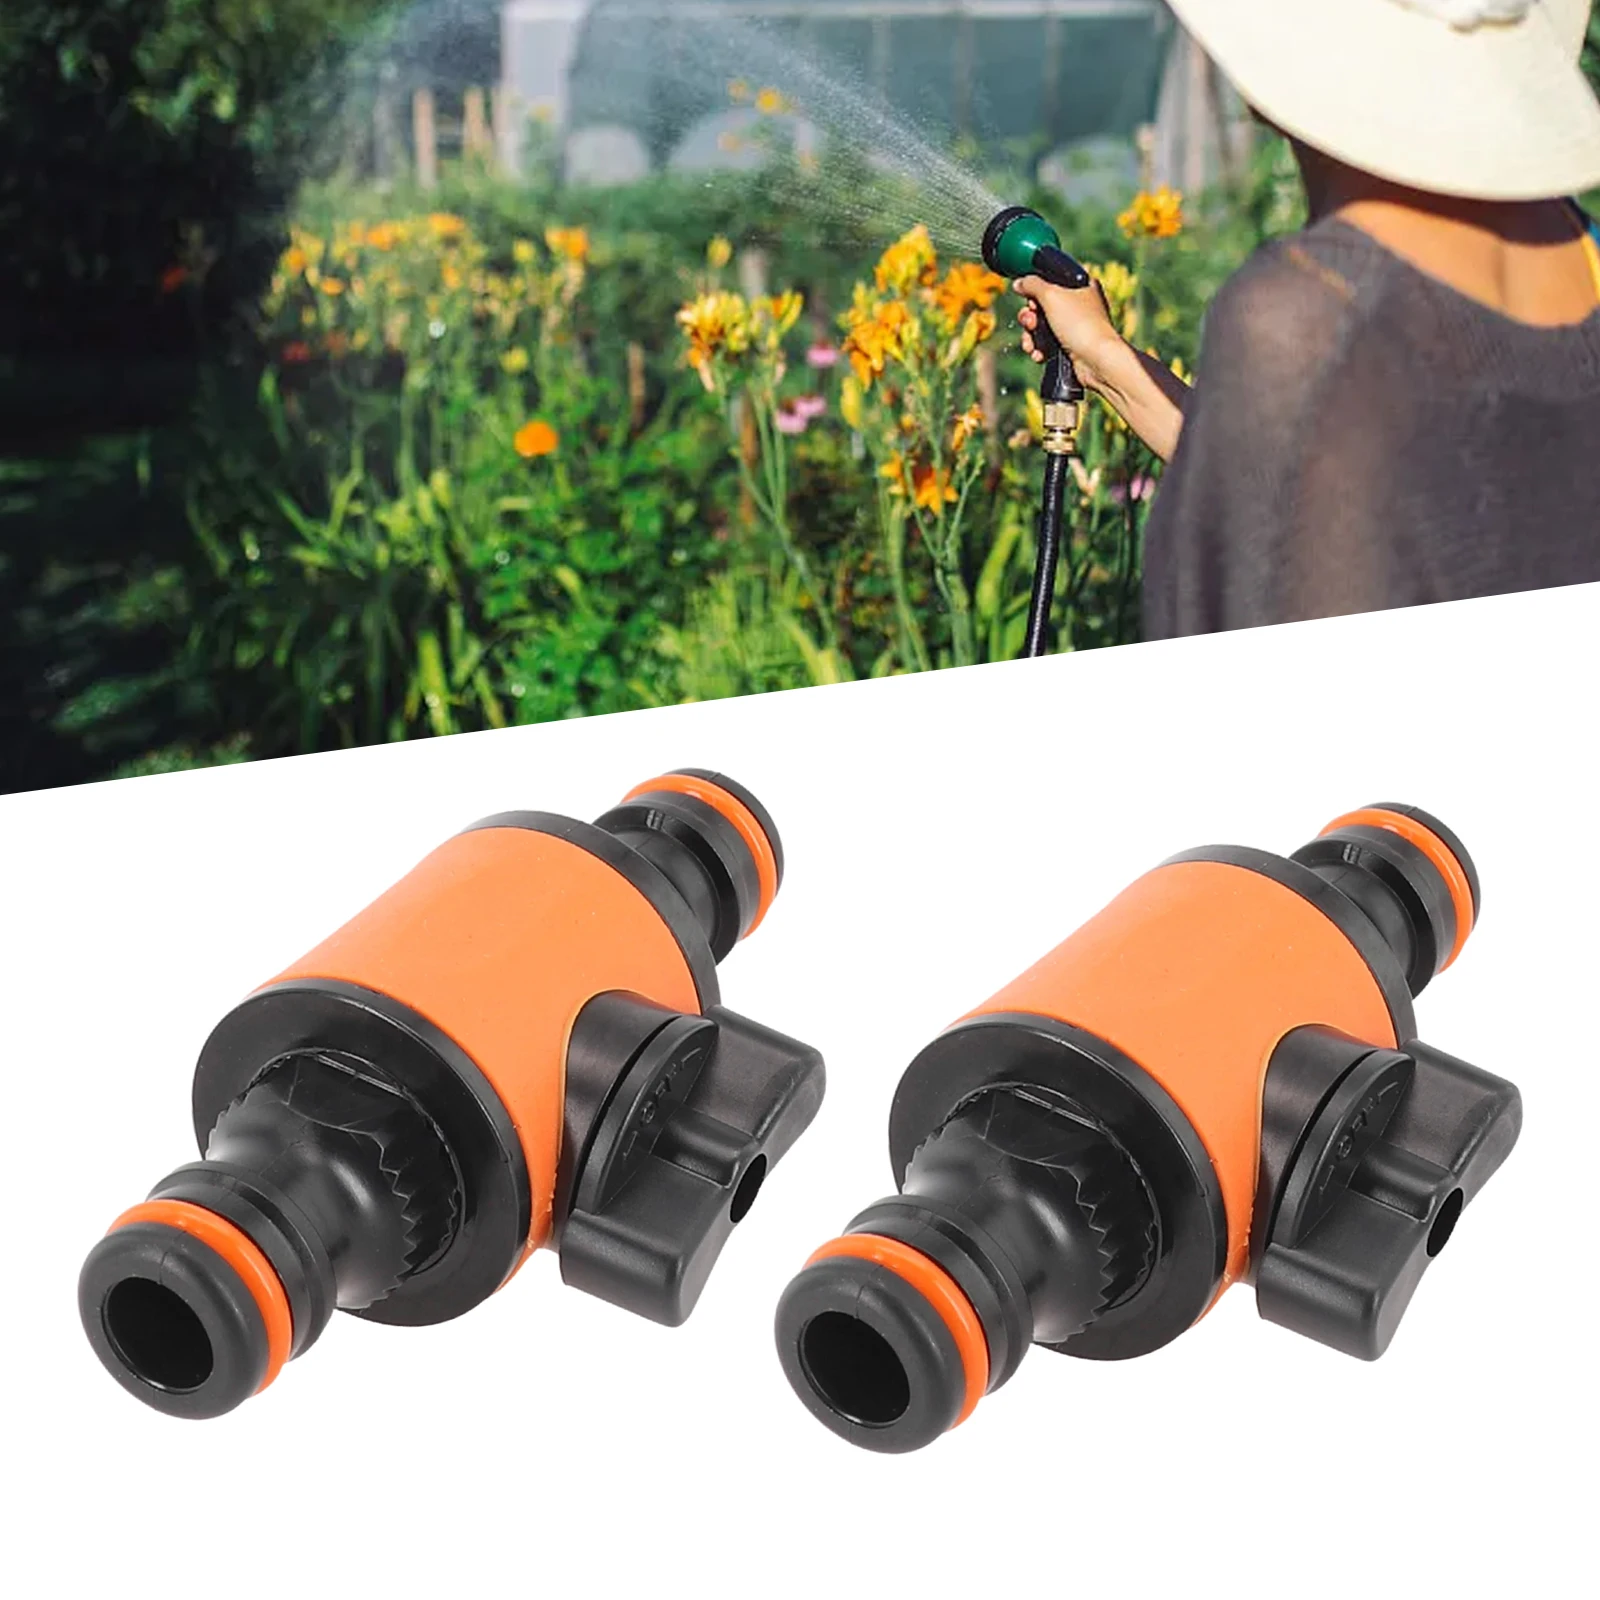 

16mm Garden Hose Quick Connector Water Hose Quick Pipe Connector Fitting Garden Repair Joint Irrigation System